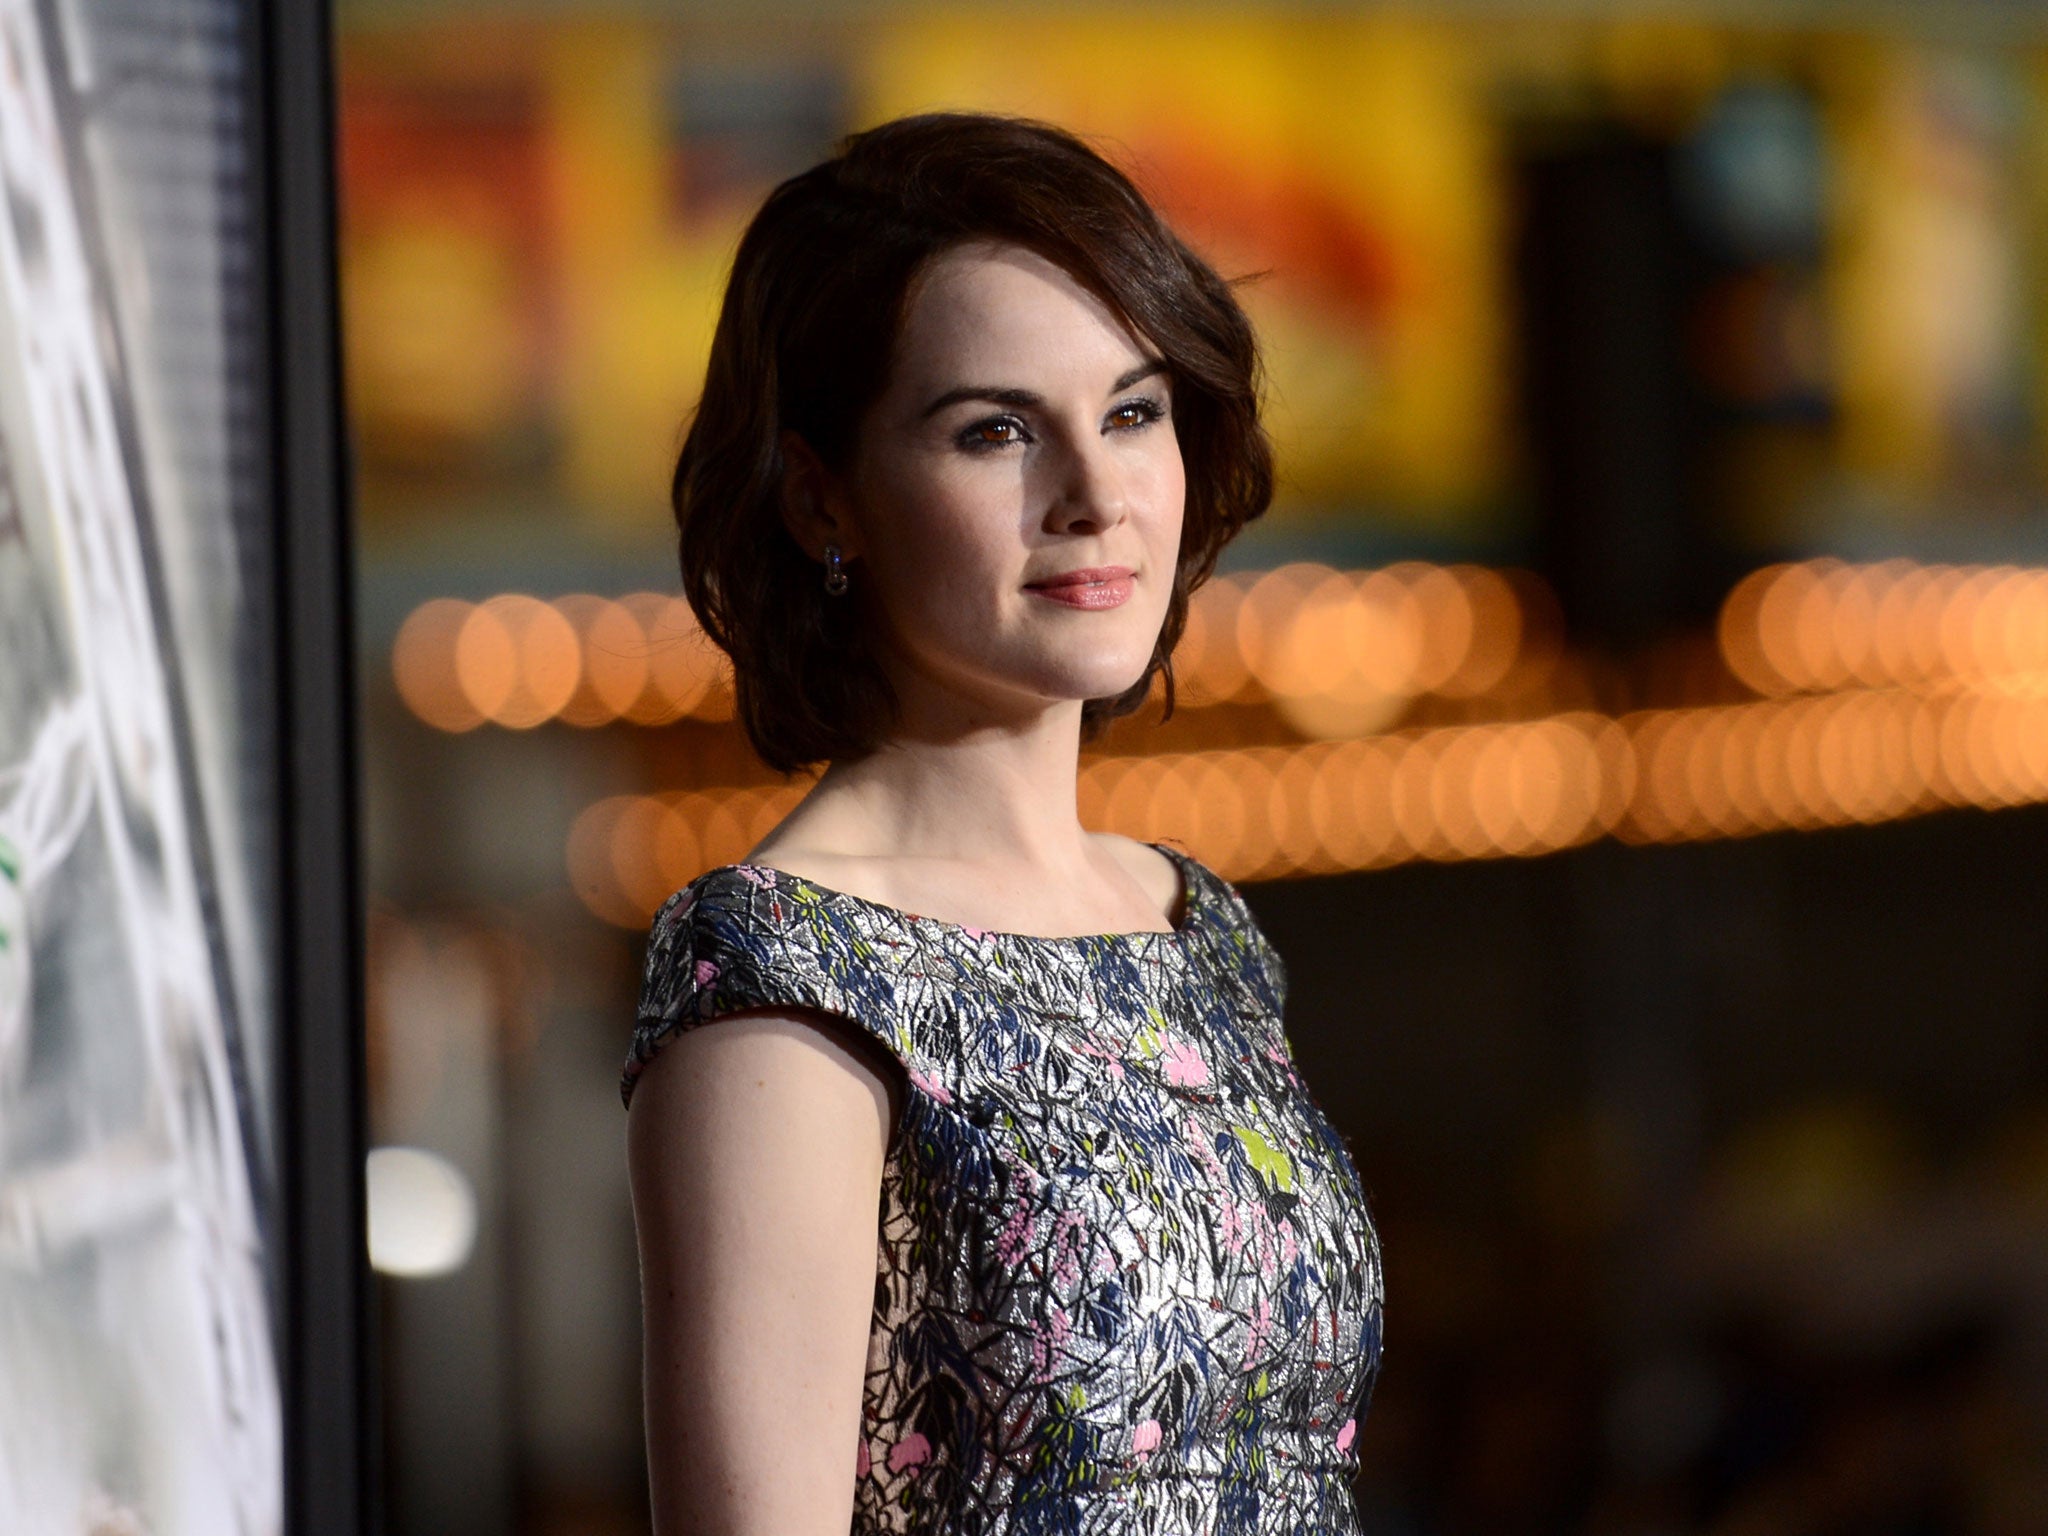 Michelle Dockery at the LA premiere for Non-Stop, in which she plays gutsy air hostess Nancy alongside Liam Neeson